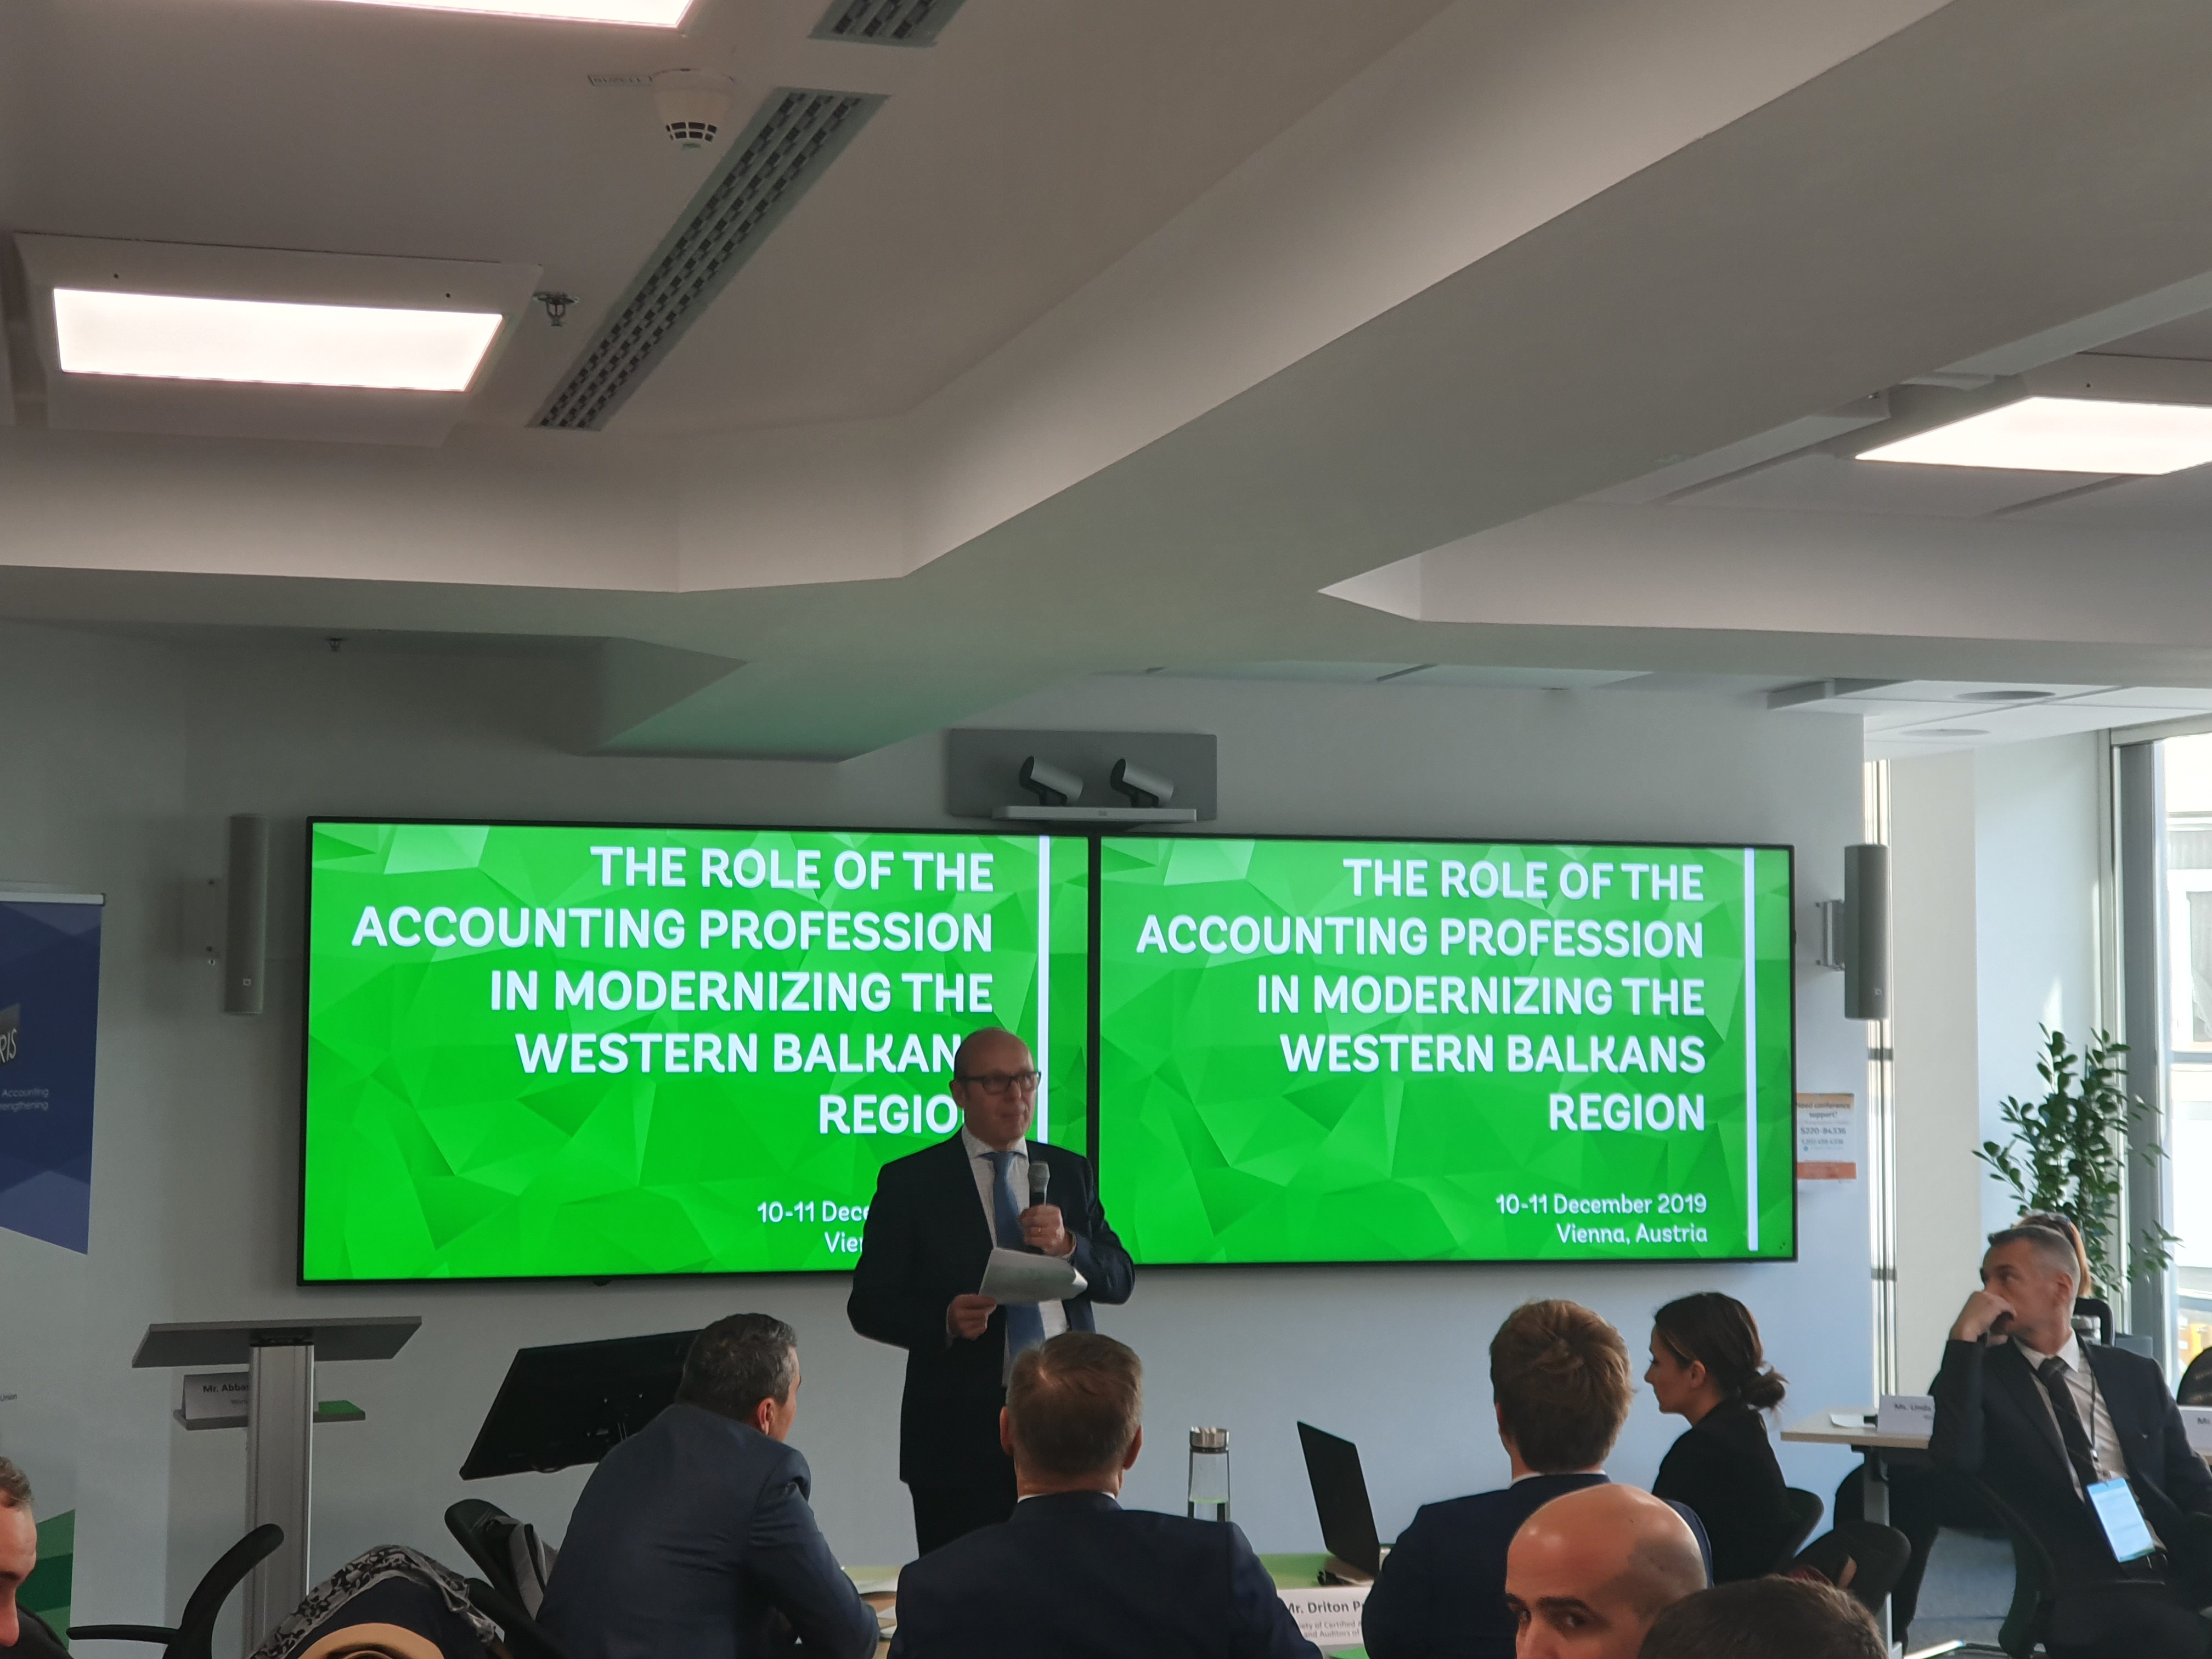 The role of the accounting profession in modernizing the Western Balkans region